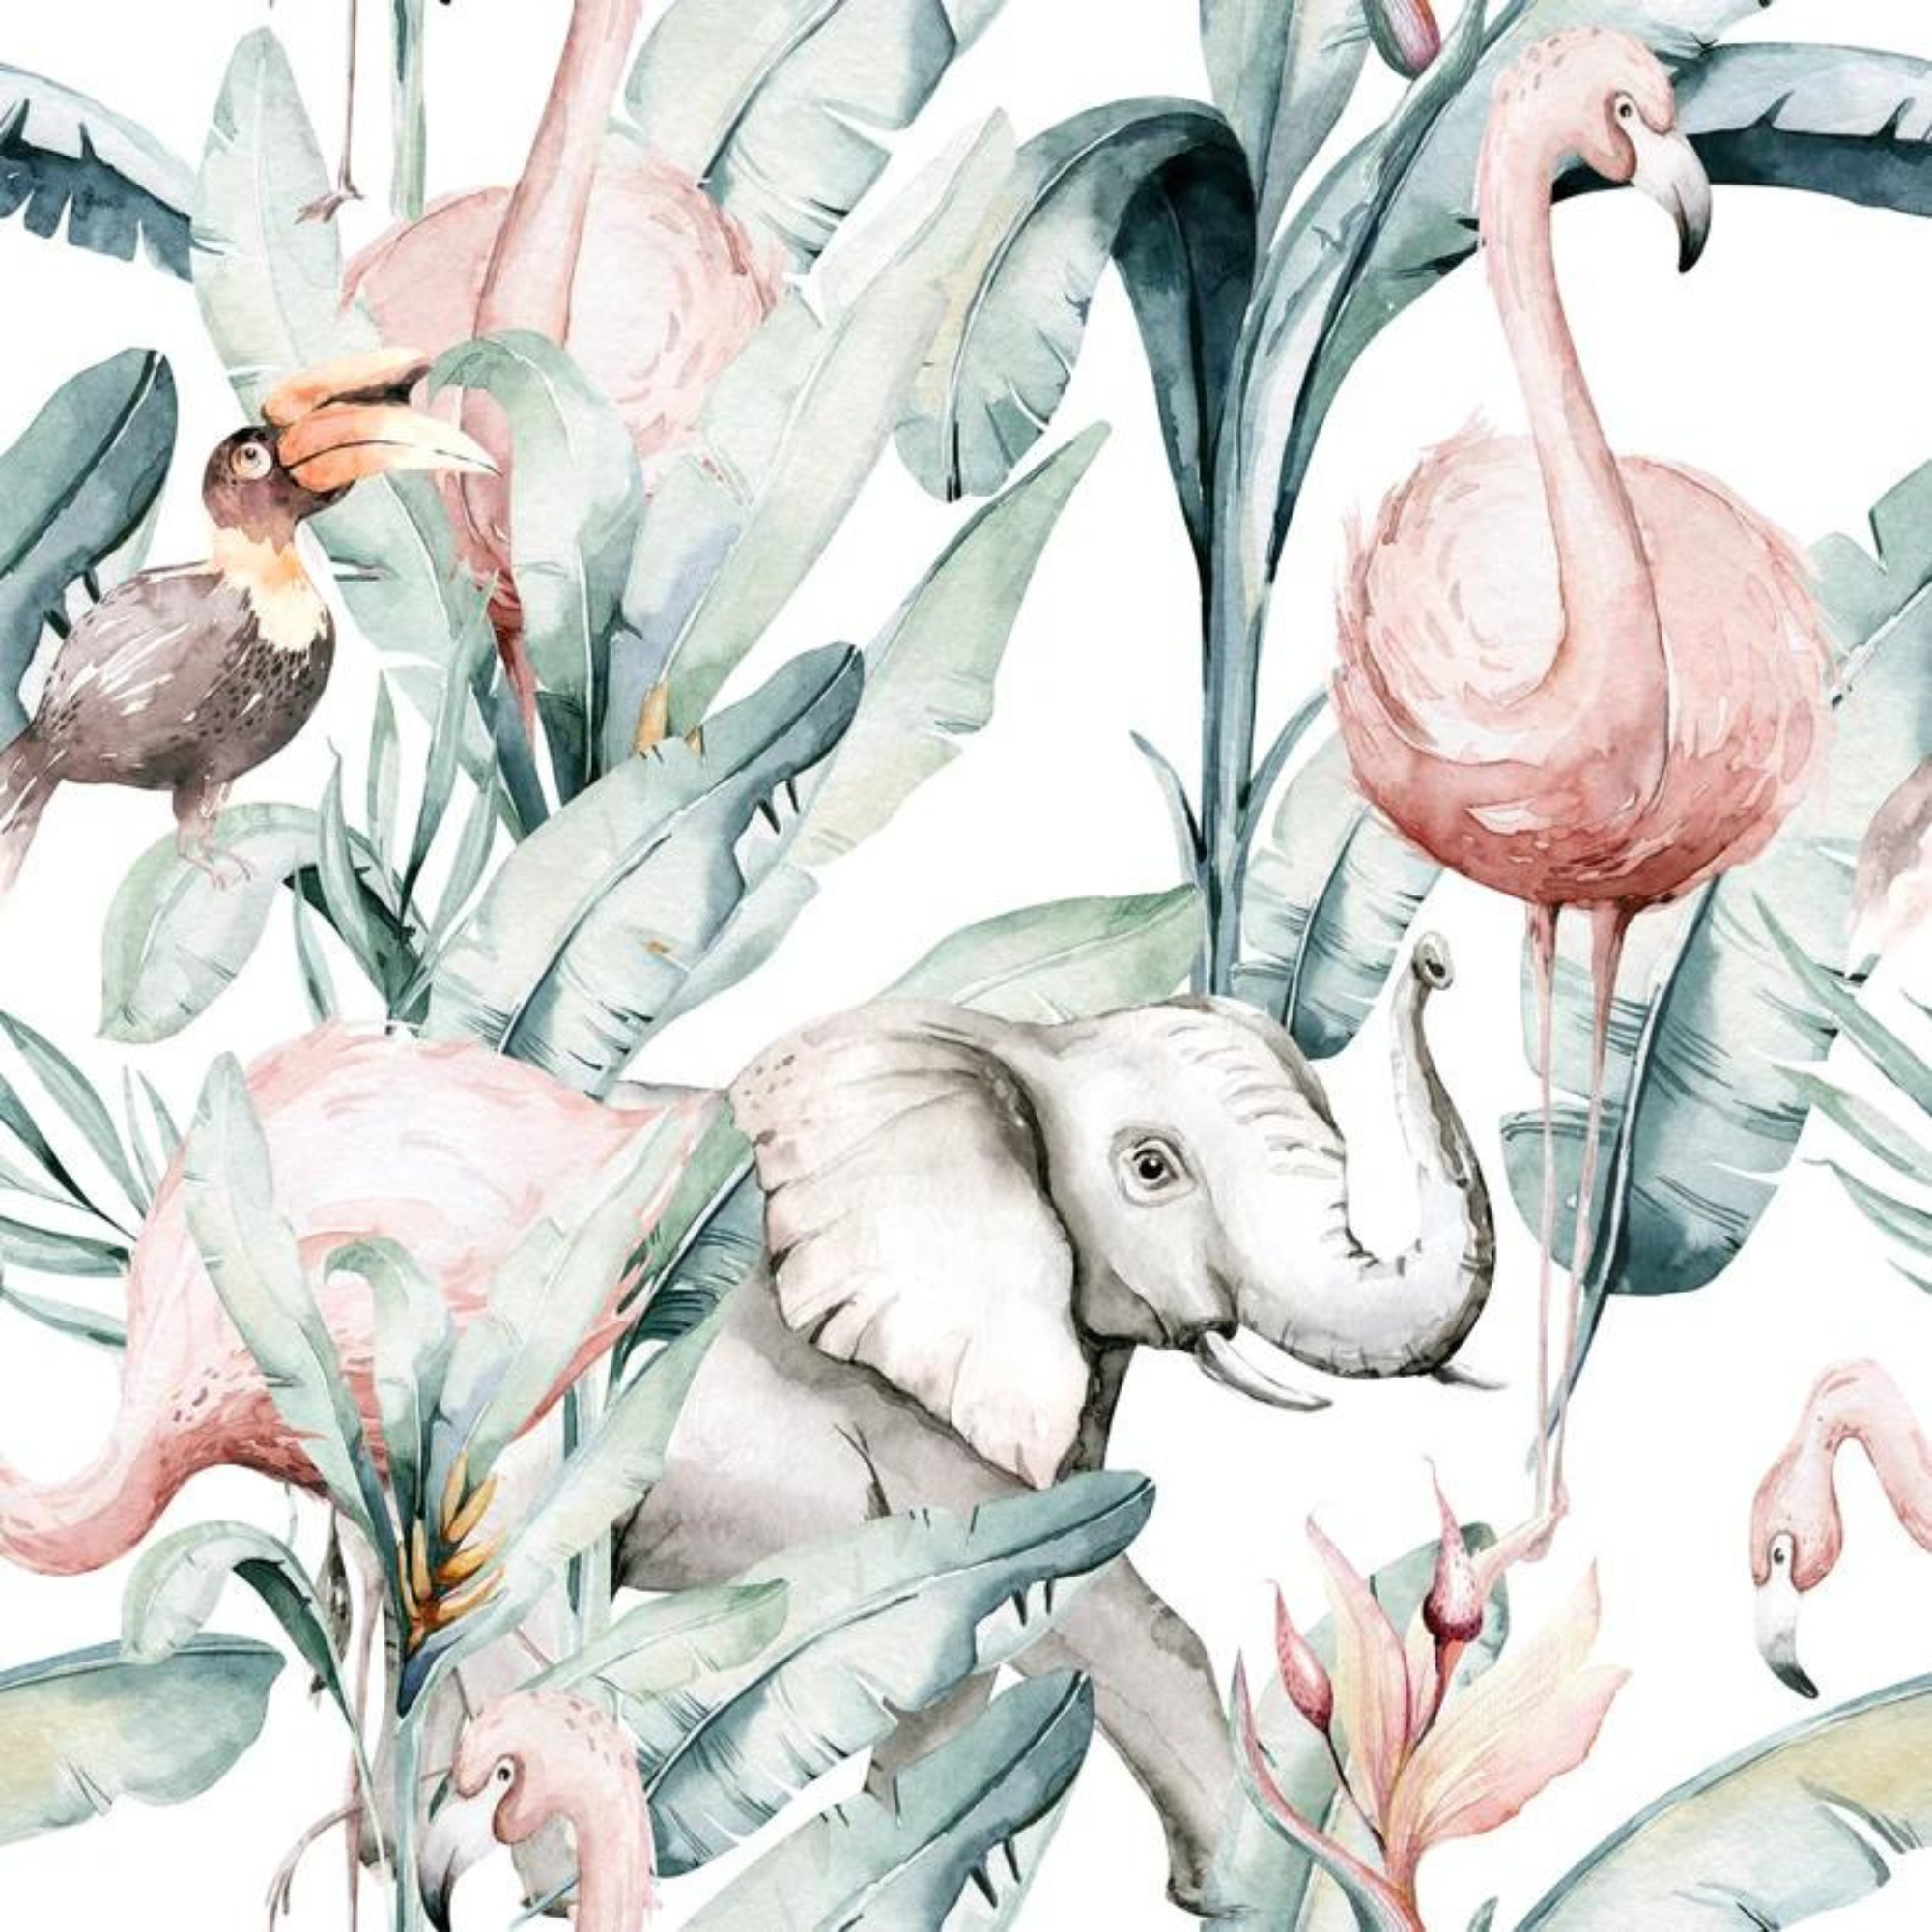 Close-up view of 'Tropical Wallpaper - African Animals' depicting watercolor illustrations of African wildlife including elephants and flamingos amidst lush greenery, ideal for a dynamic and engaging wall decor.